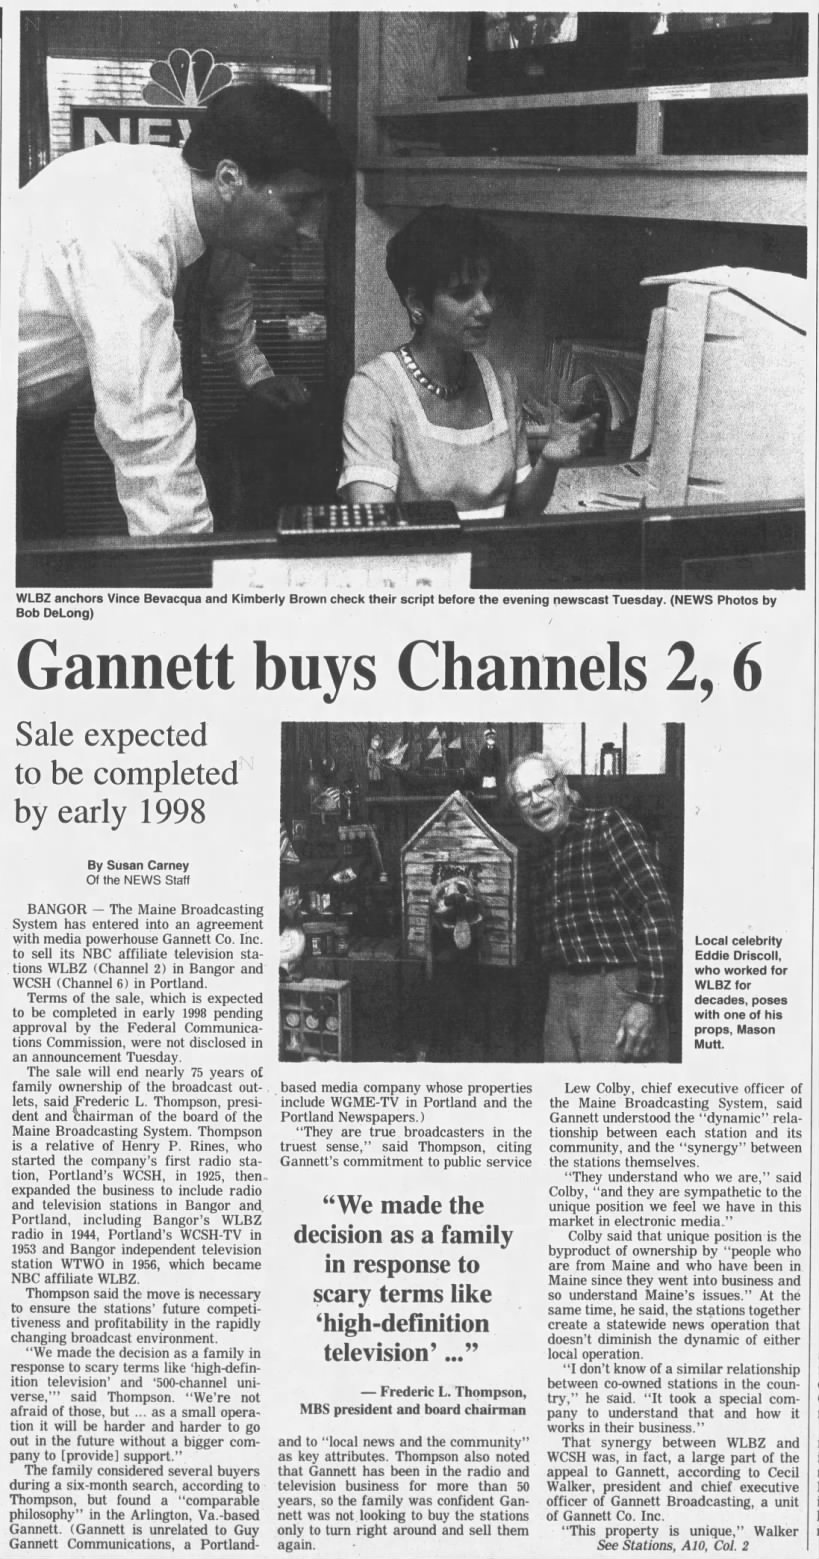 Gannett buys Channels 2, 6: Sale expected to be completed by early 1998